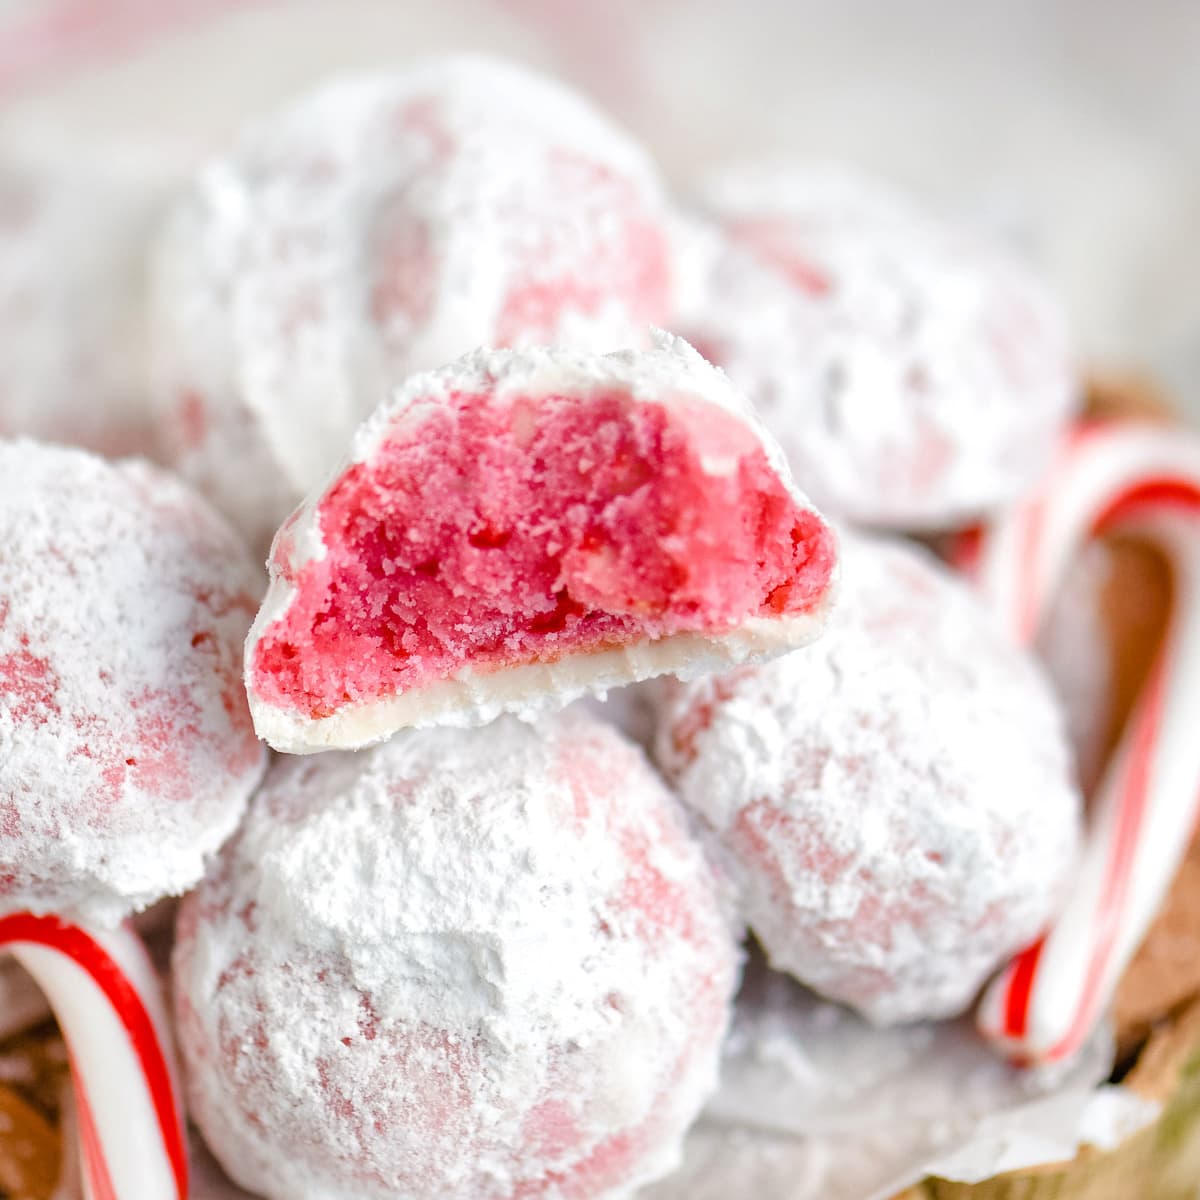 https://www.momontimeout.com/wp-content/uploads/2015/12/peppermint-snowball-cookie-recipe-square.jpg